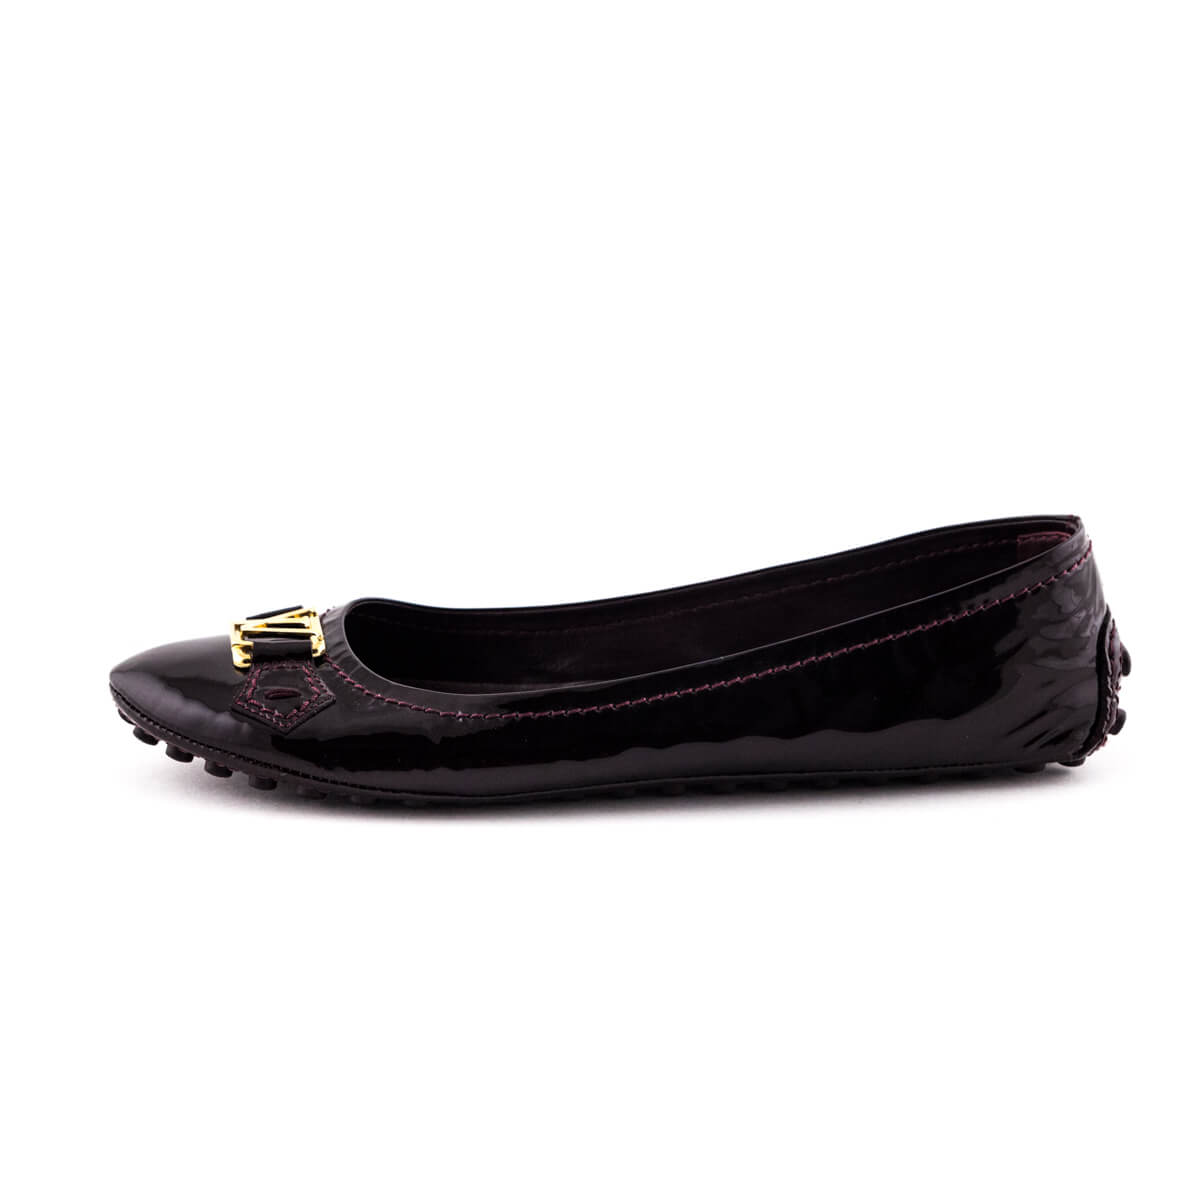 Louis Vuitton - Authenticated Ballet Flats - Patent Leather Burgundy for Women, Never Worn